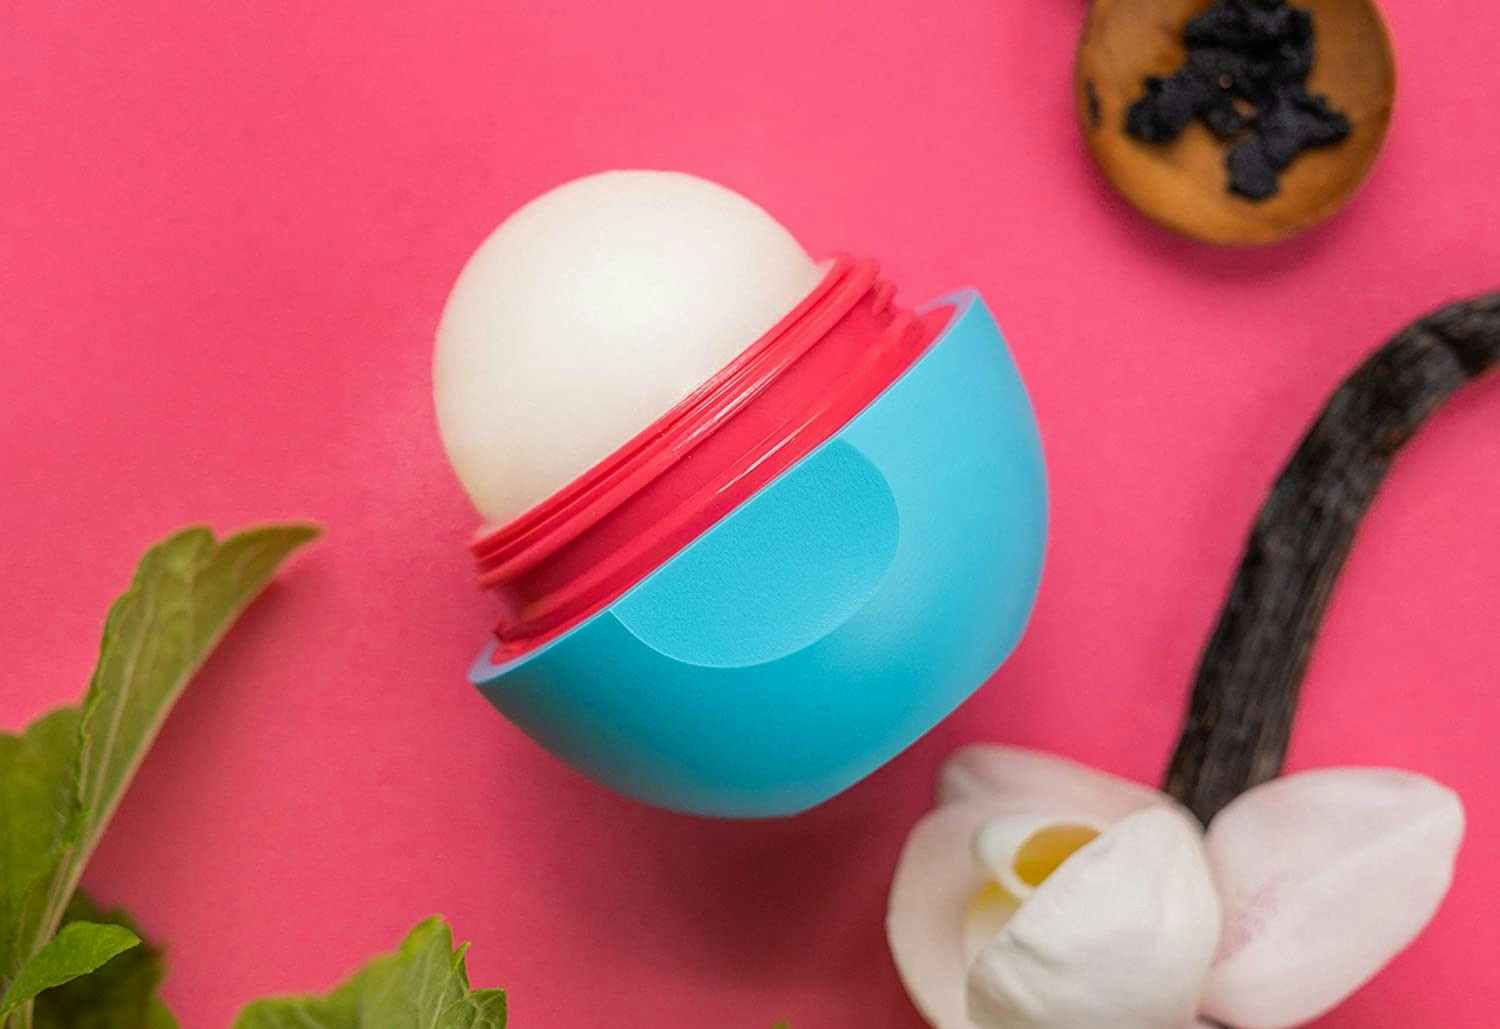 An open container of Eos vanilla-scented lip balm.